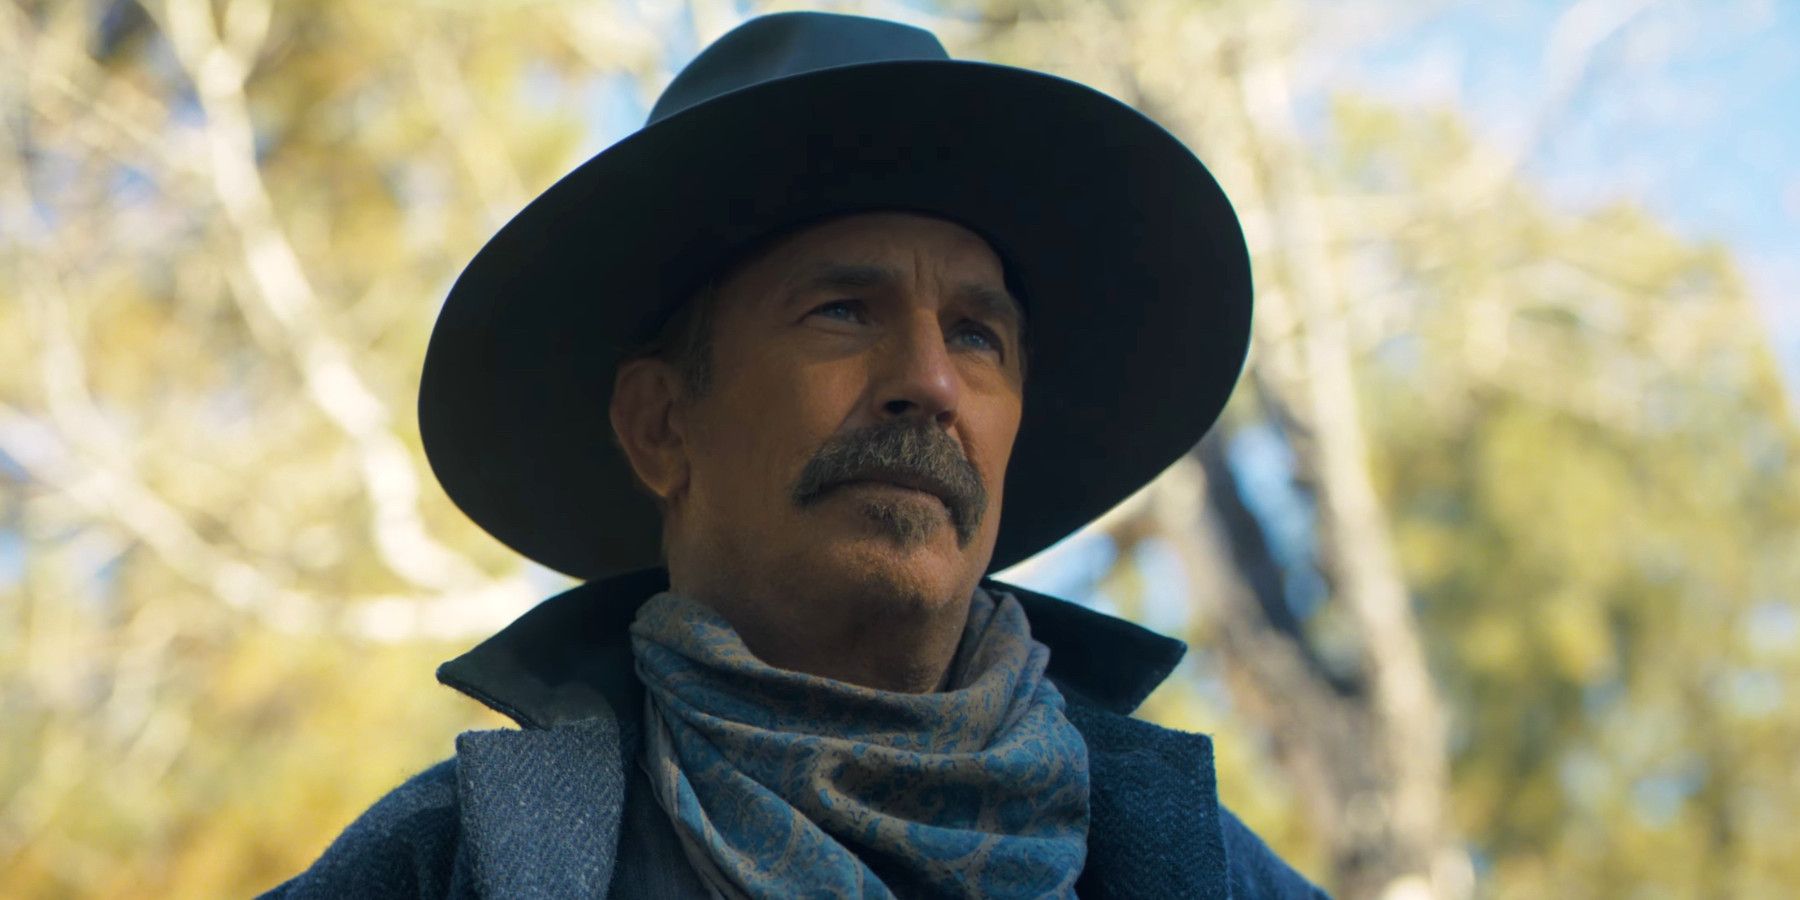 Kevin Costner in Horizon wearing a cowboy hat and looking stoically off into the distance